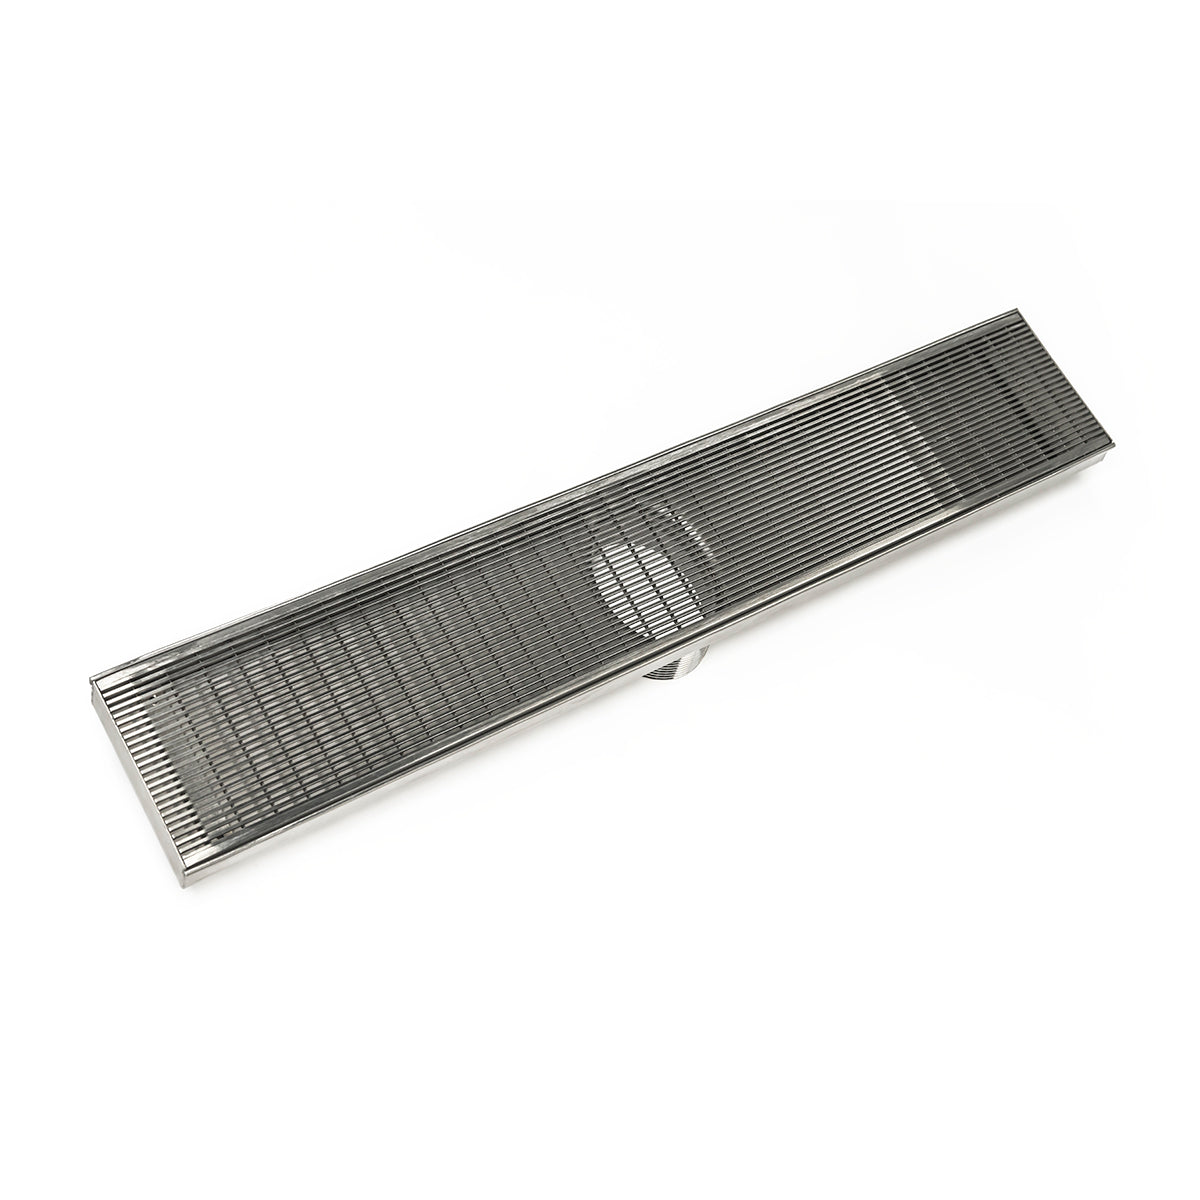 Infinity Drain 32" FX Series High Flow Fixed Length Linear Drain Kit with Wedge Wire Grate with PVC Drain Body